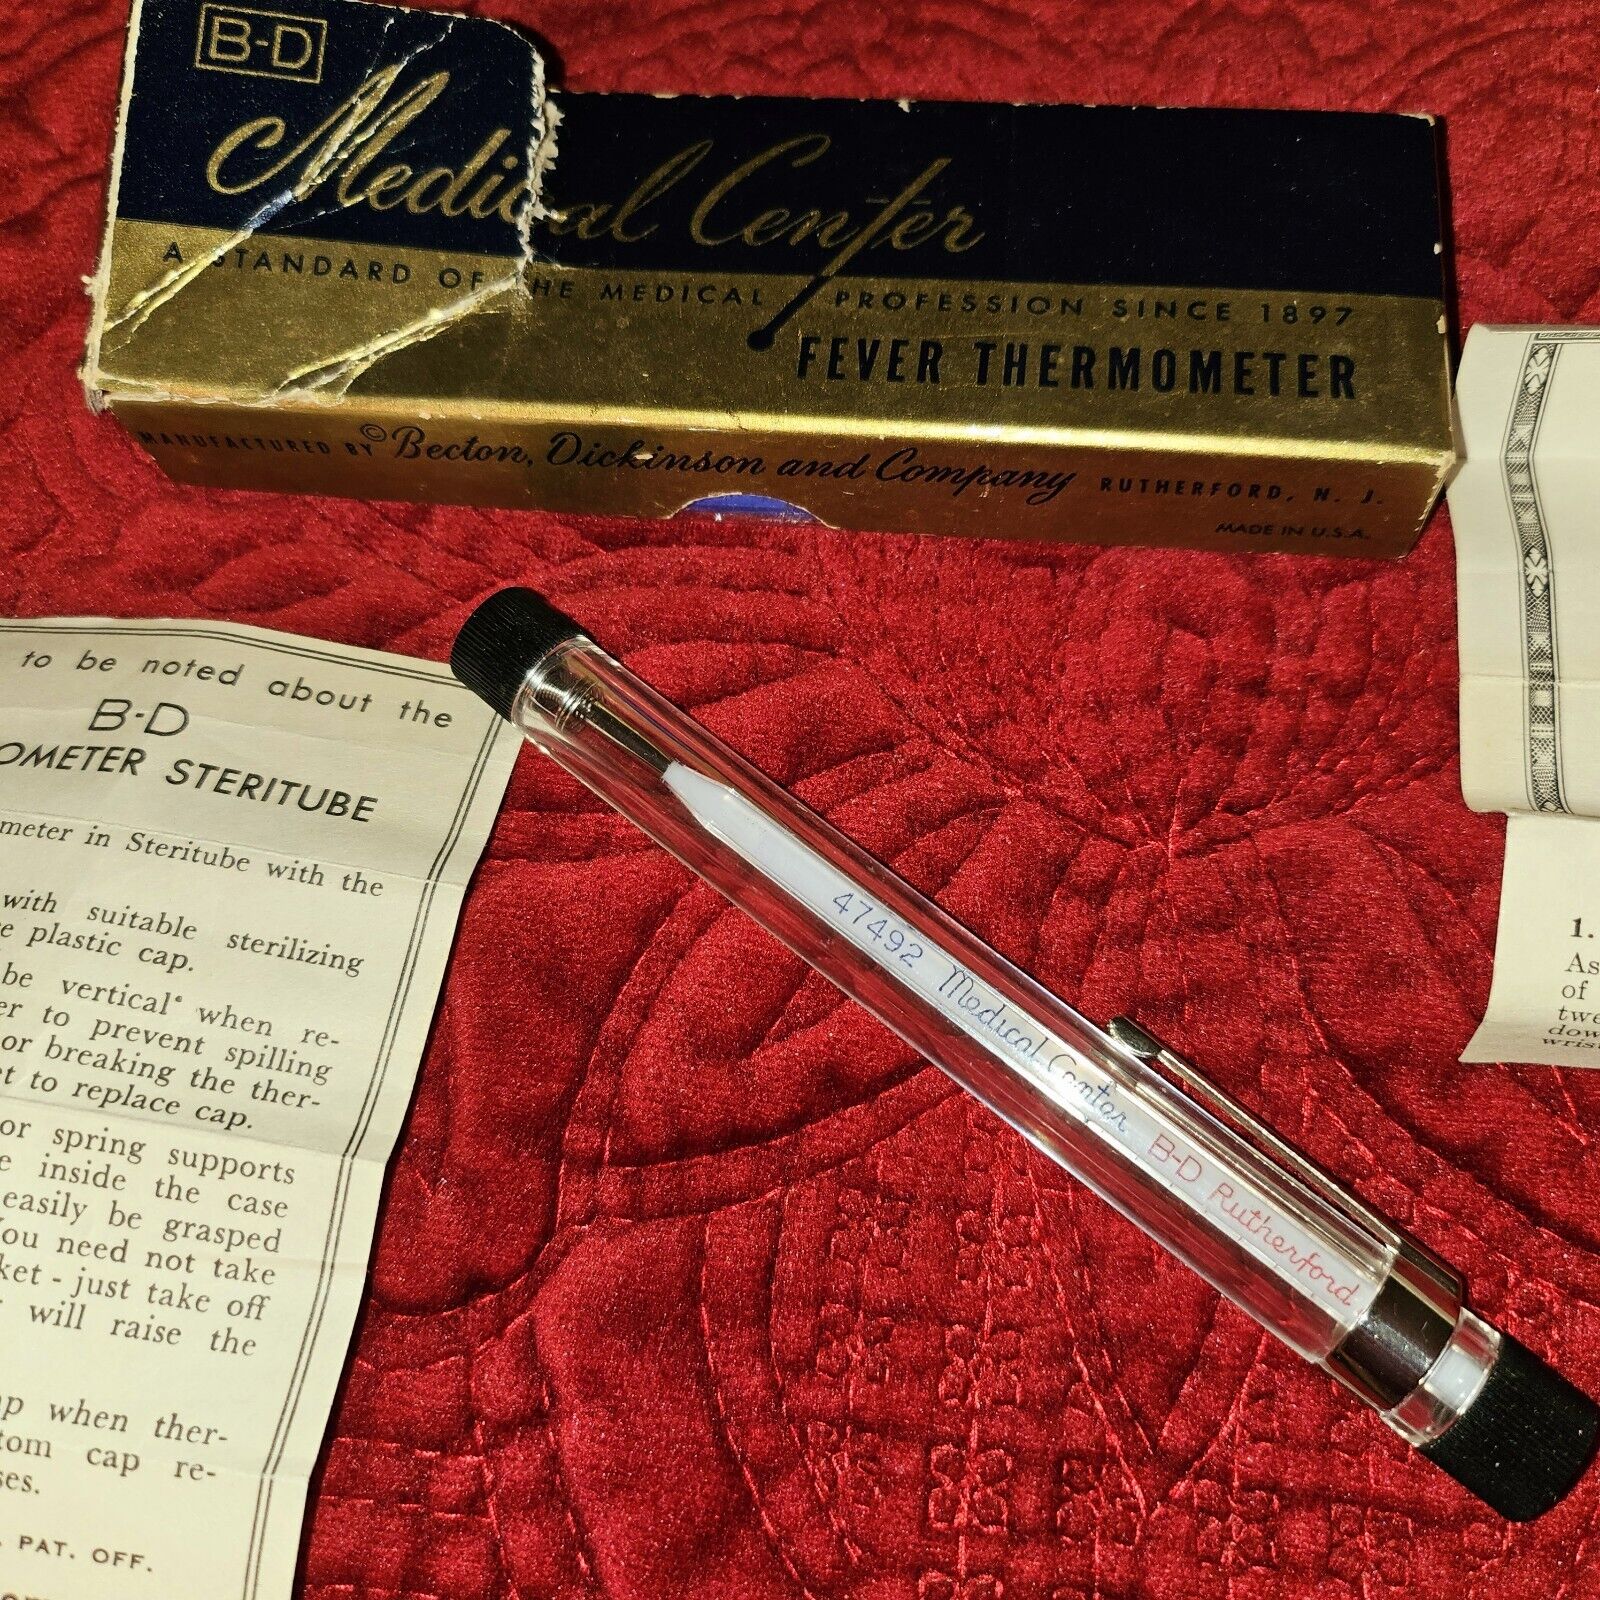 Vintage 1950's Medical Center Glass Oral Fever Thermometer W/ Box Case Steritube